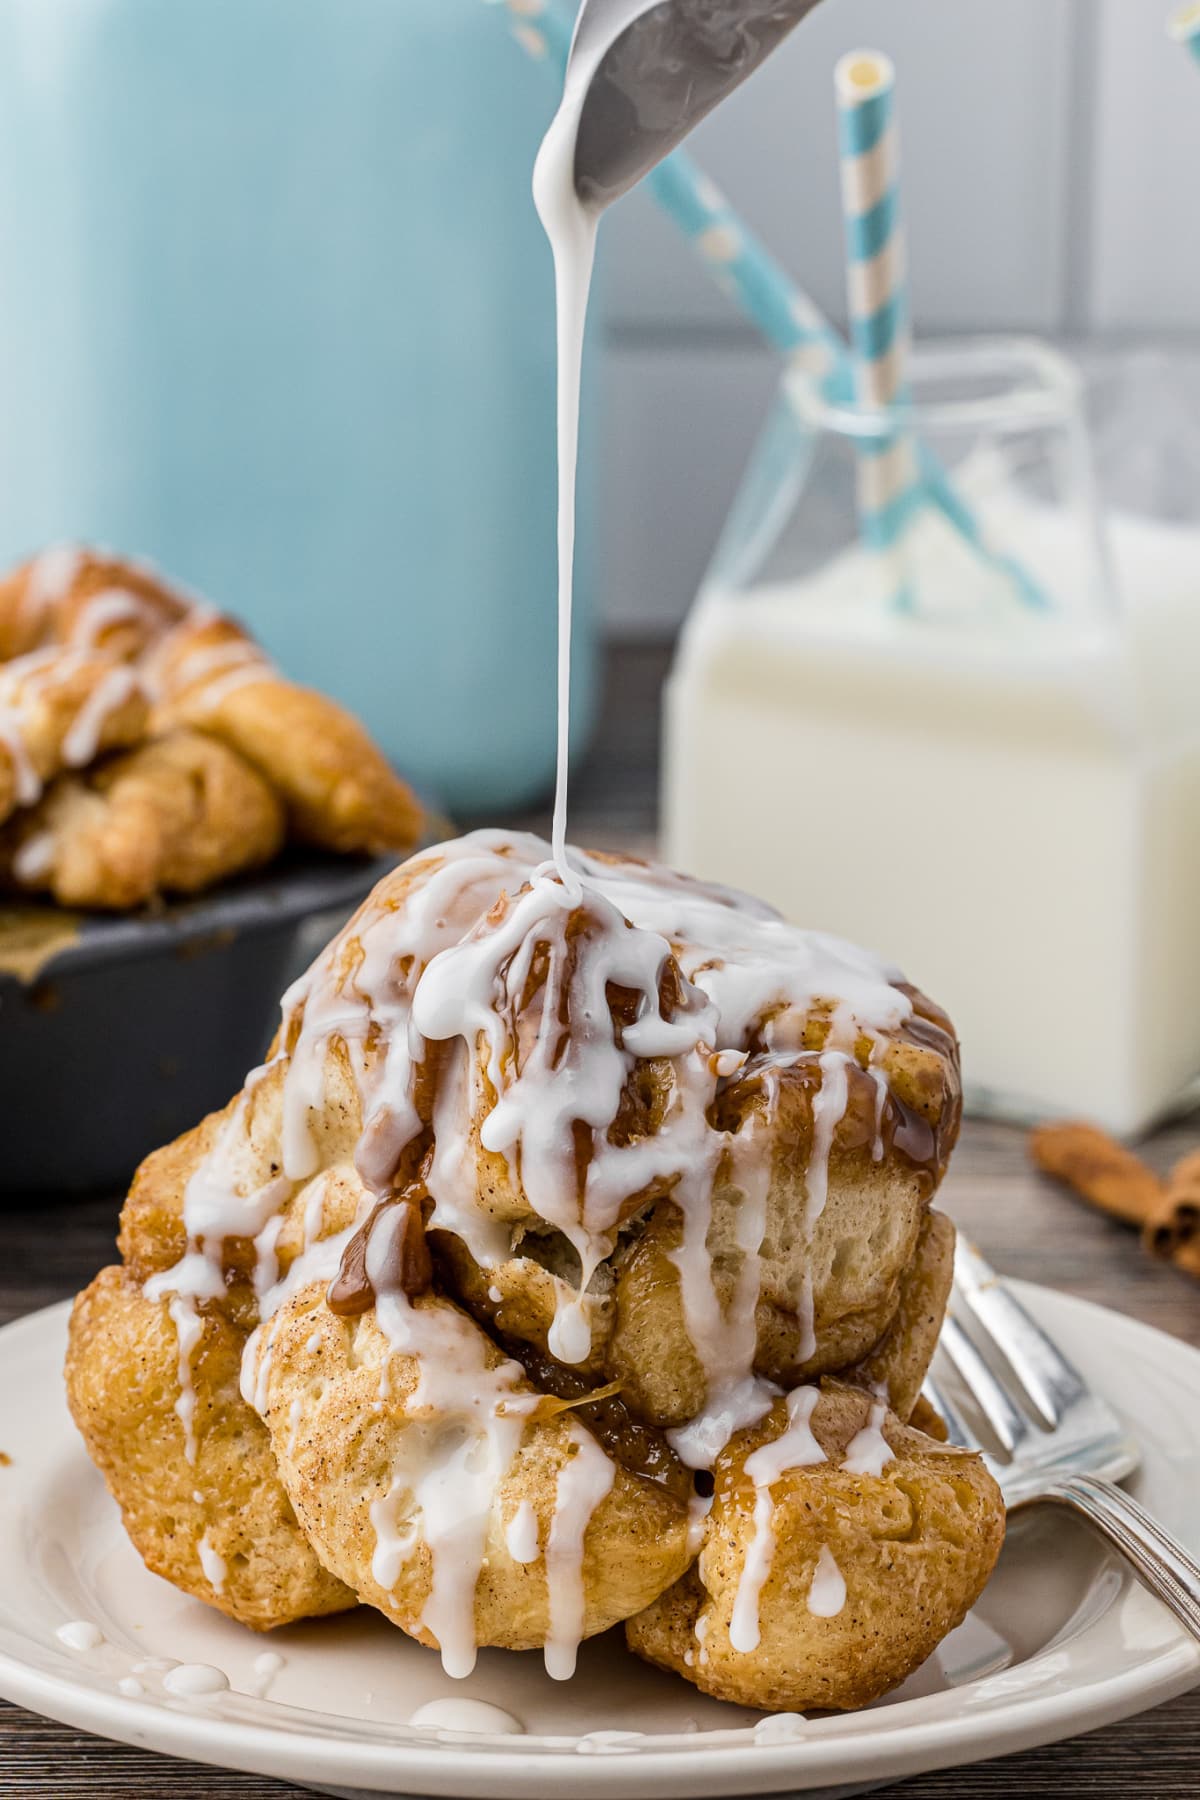 icing being drizzled over a cinnamon roll with milk in the background